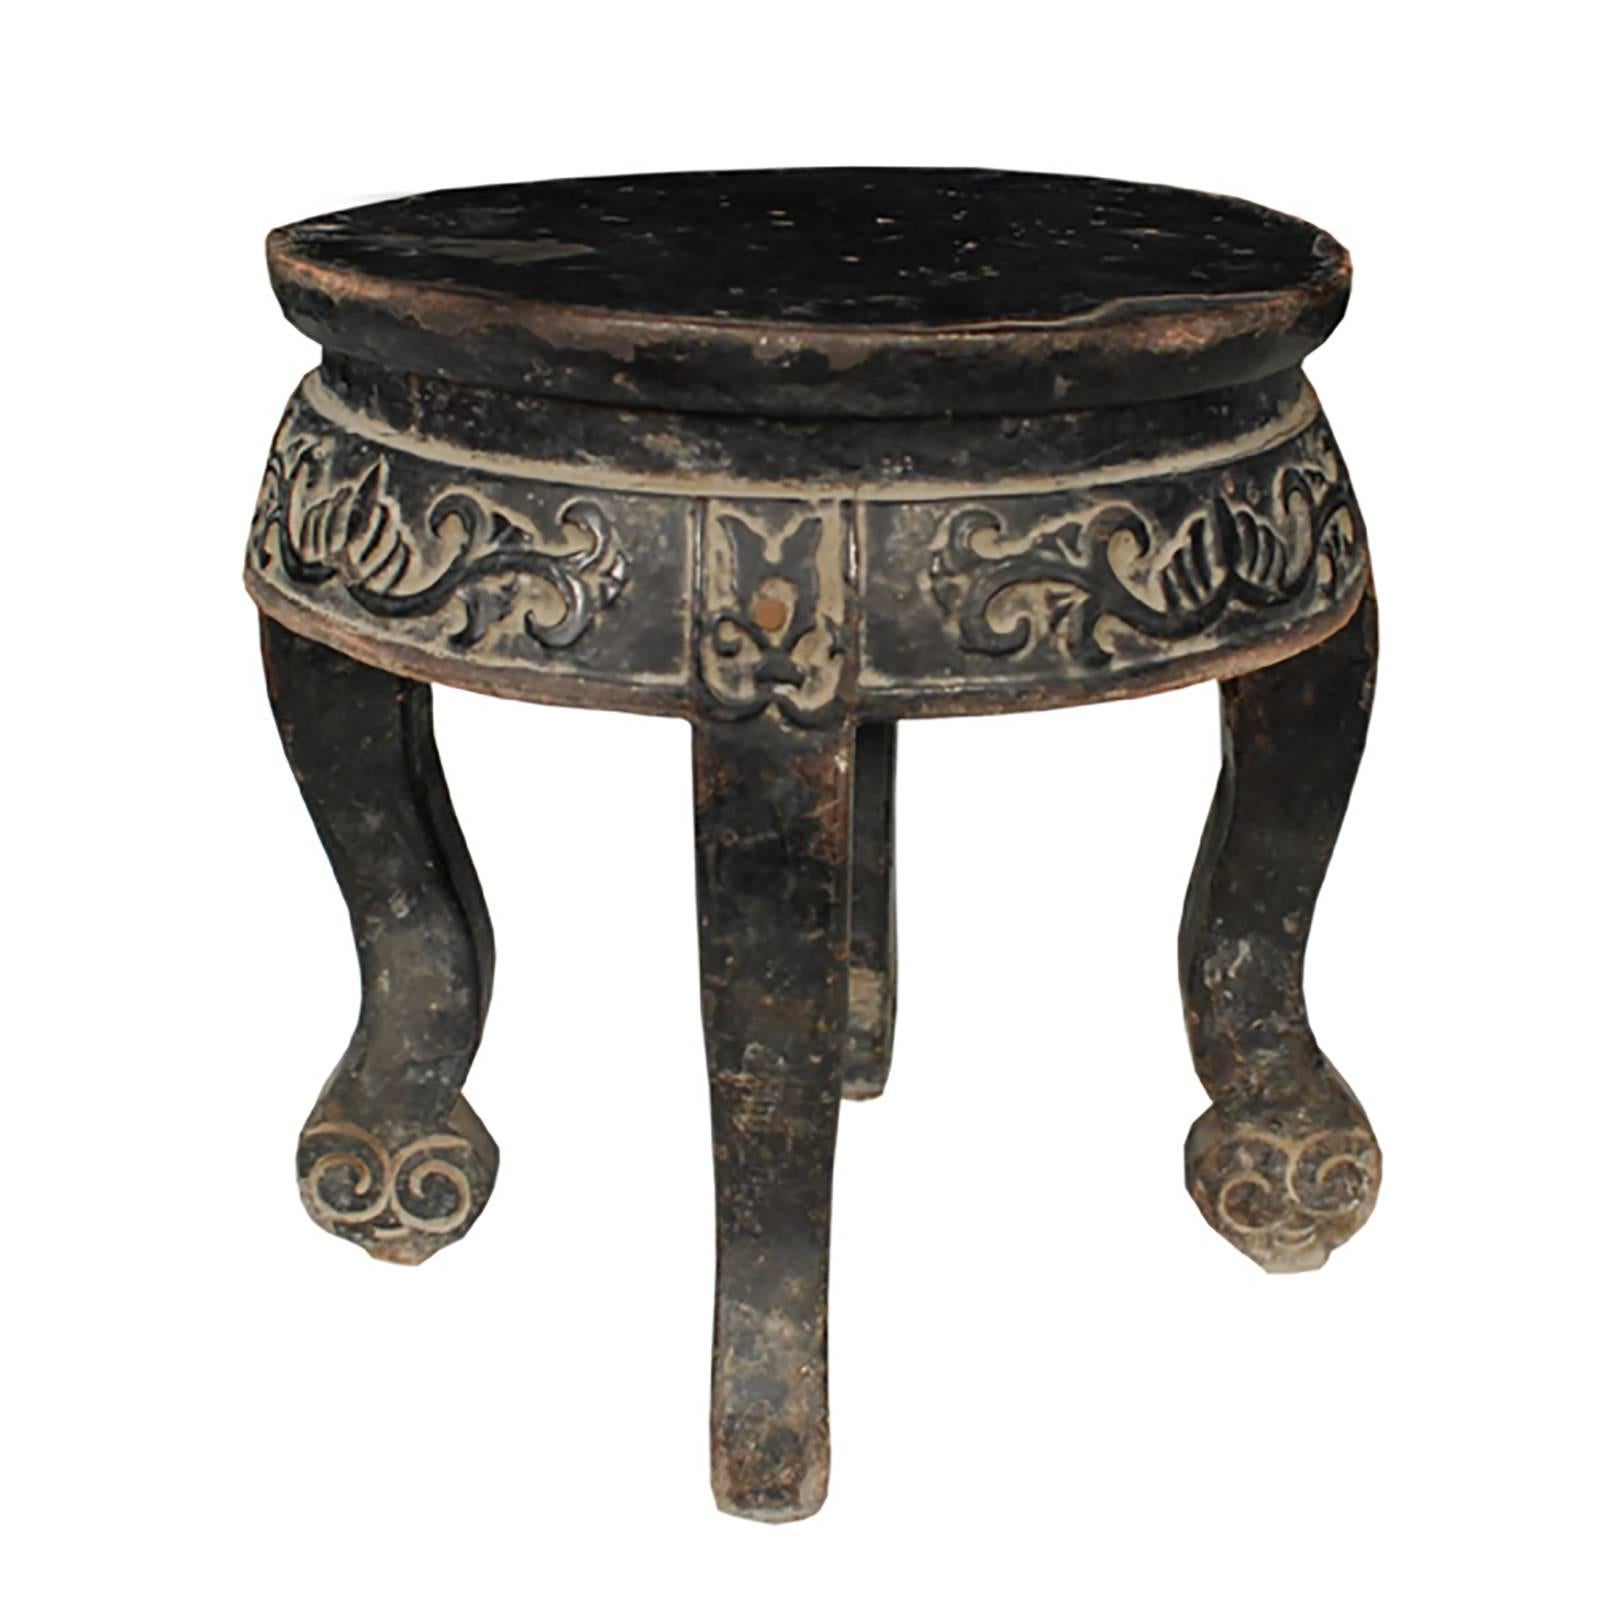 This petite round early 19th century display table from Northern China was hand-carved out of northern elm. It was likely used to support a ritual or decorative object. It features gentle cabriole legs that end in abstract auspicous cloud ruyi,